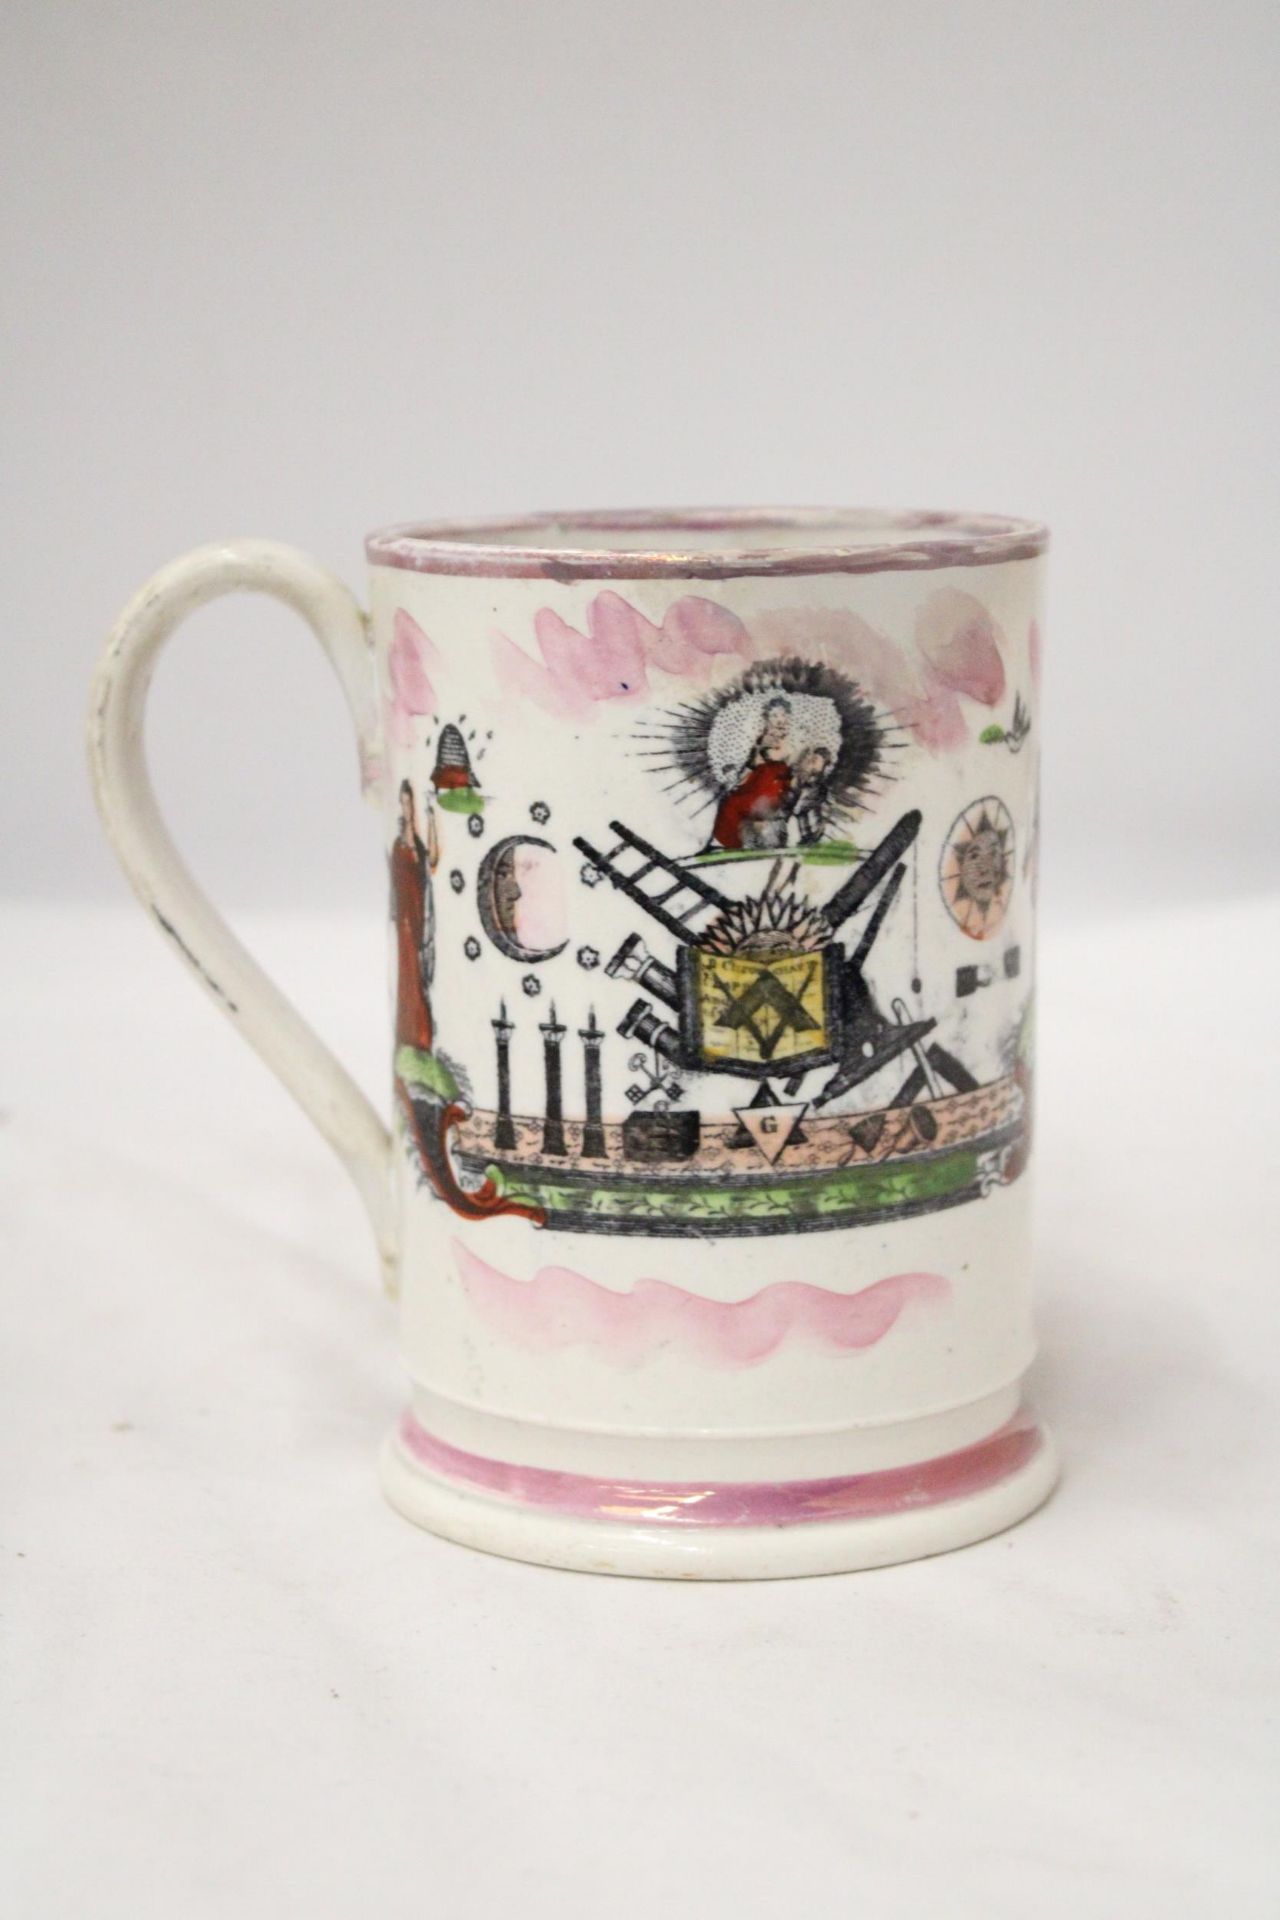 A 19TH CENTURY STAFFORDSHIRE POTTERY FROG MUG WITH 'GOD SAVE THE QUEEN' EMBLEM - Image 3 of 5